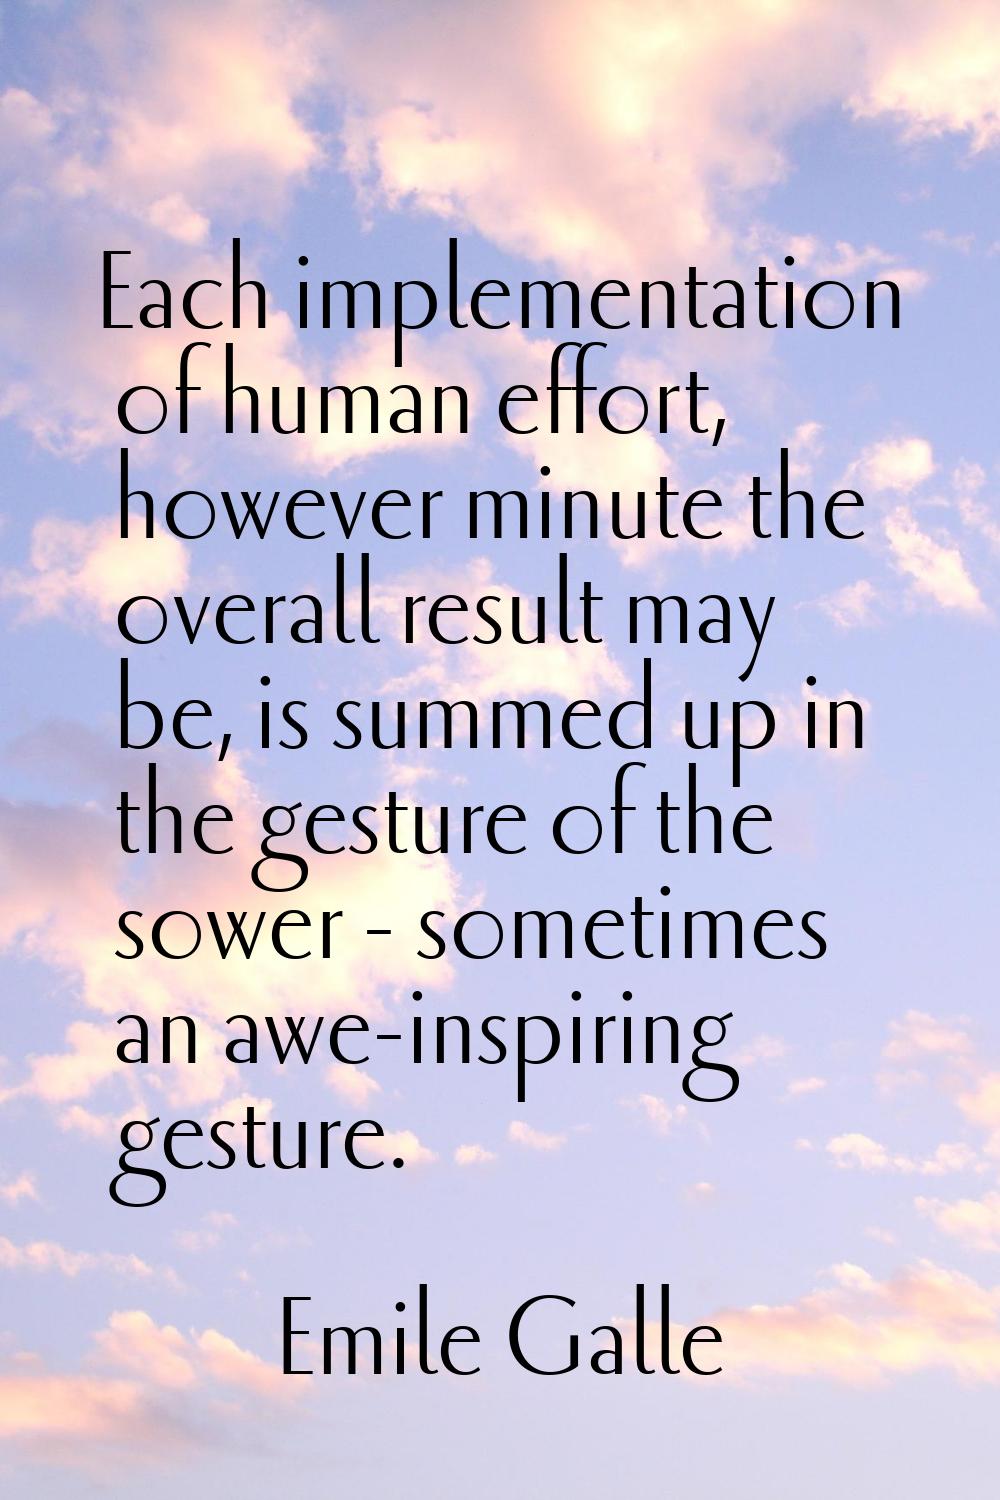 Each implementation of human effort, however minute the overall result may be, is summed up in the 